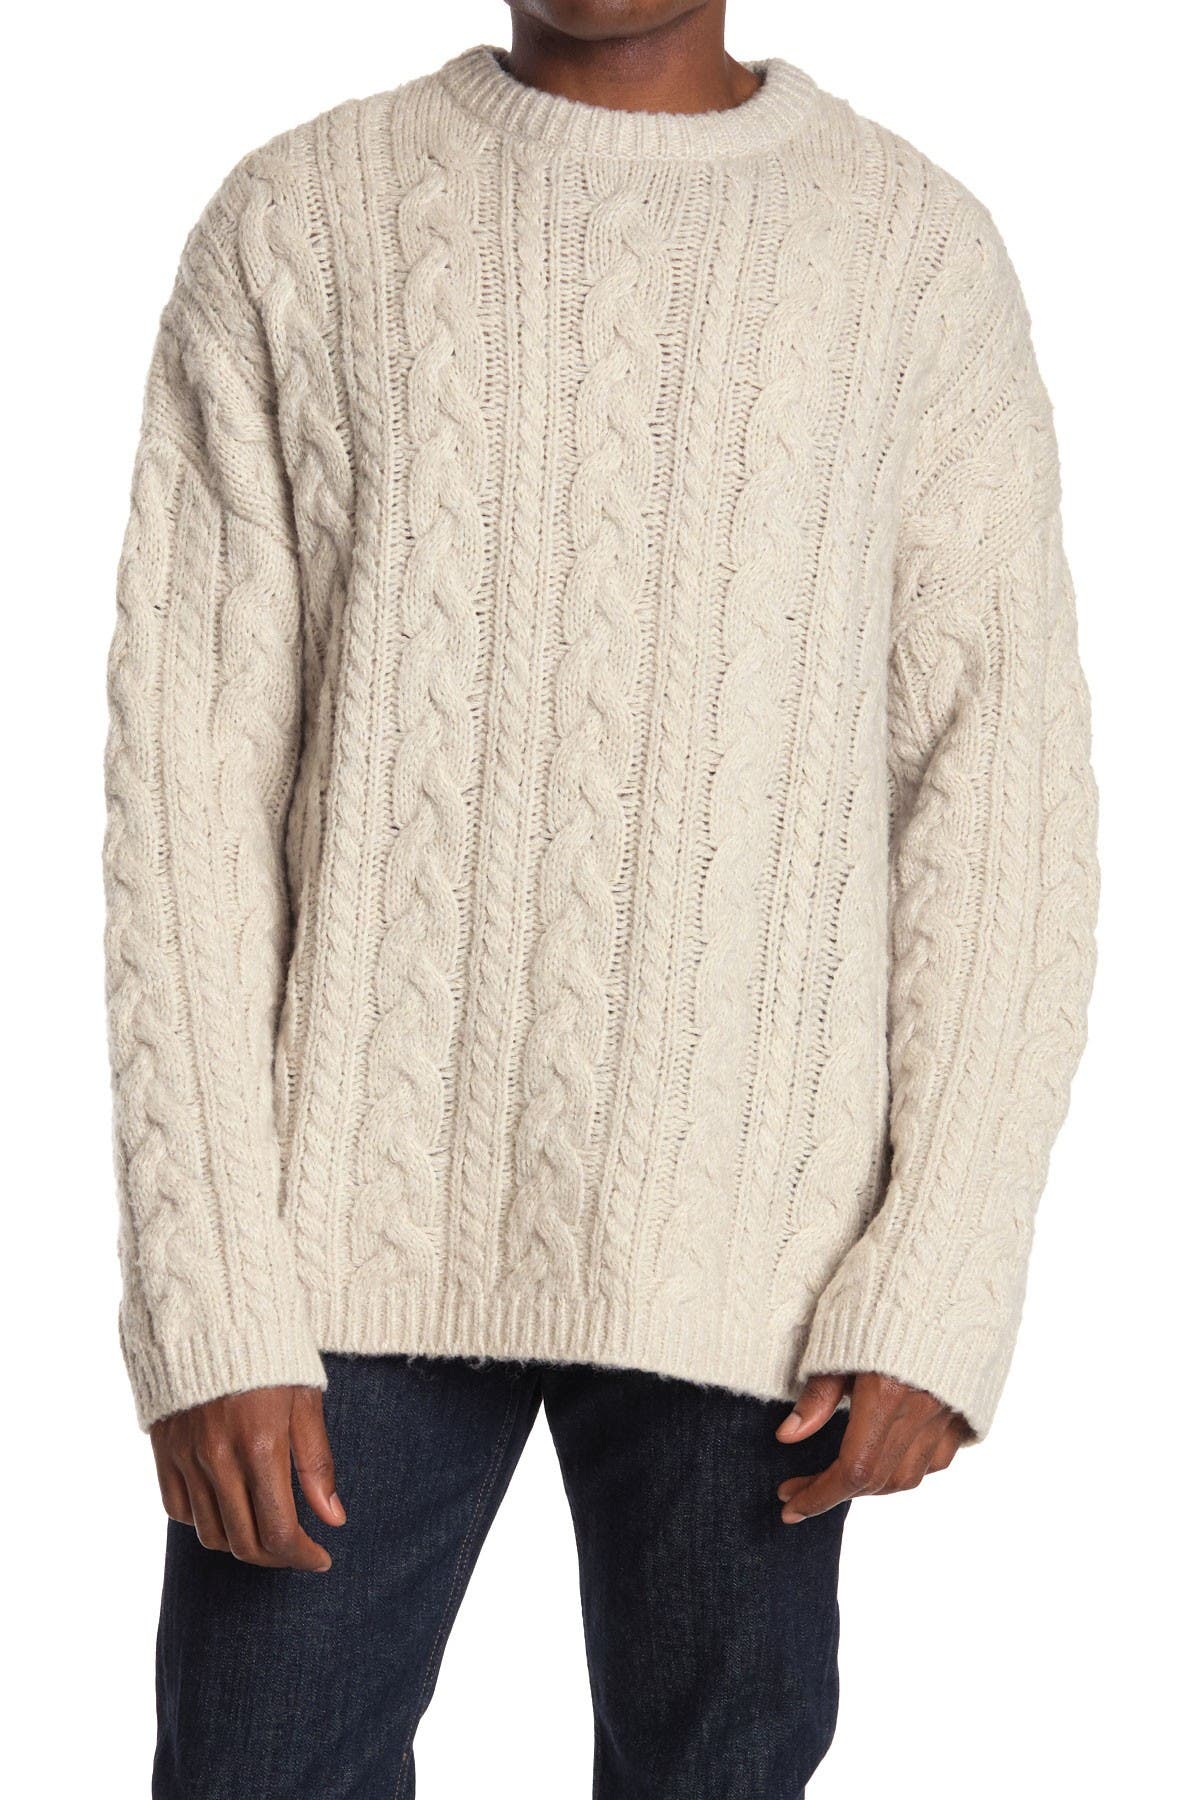 Allsaints Gable Cable Knit Pullover Sweater In Ecru White